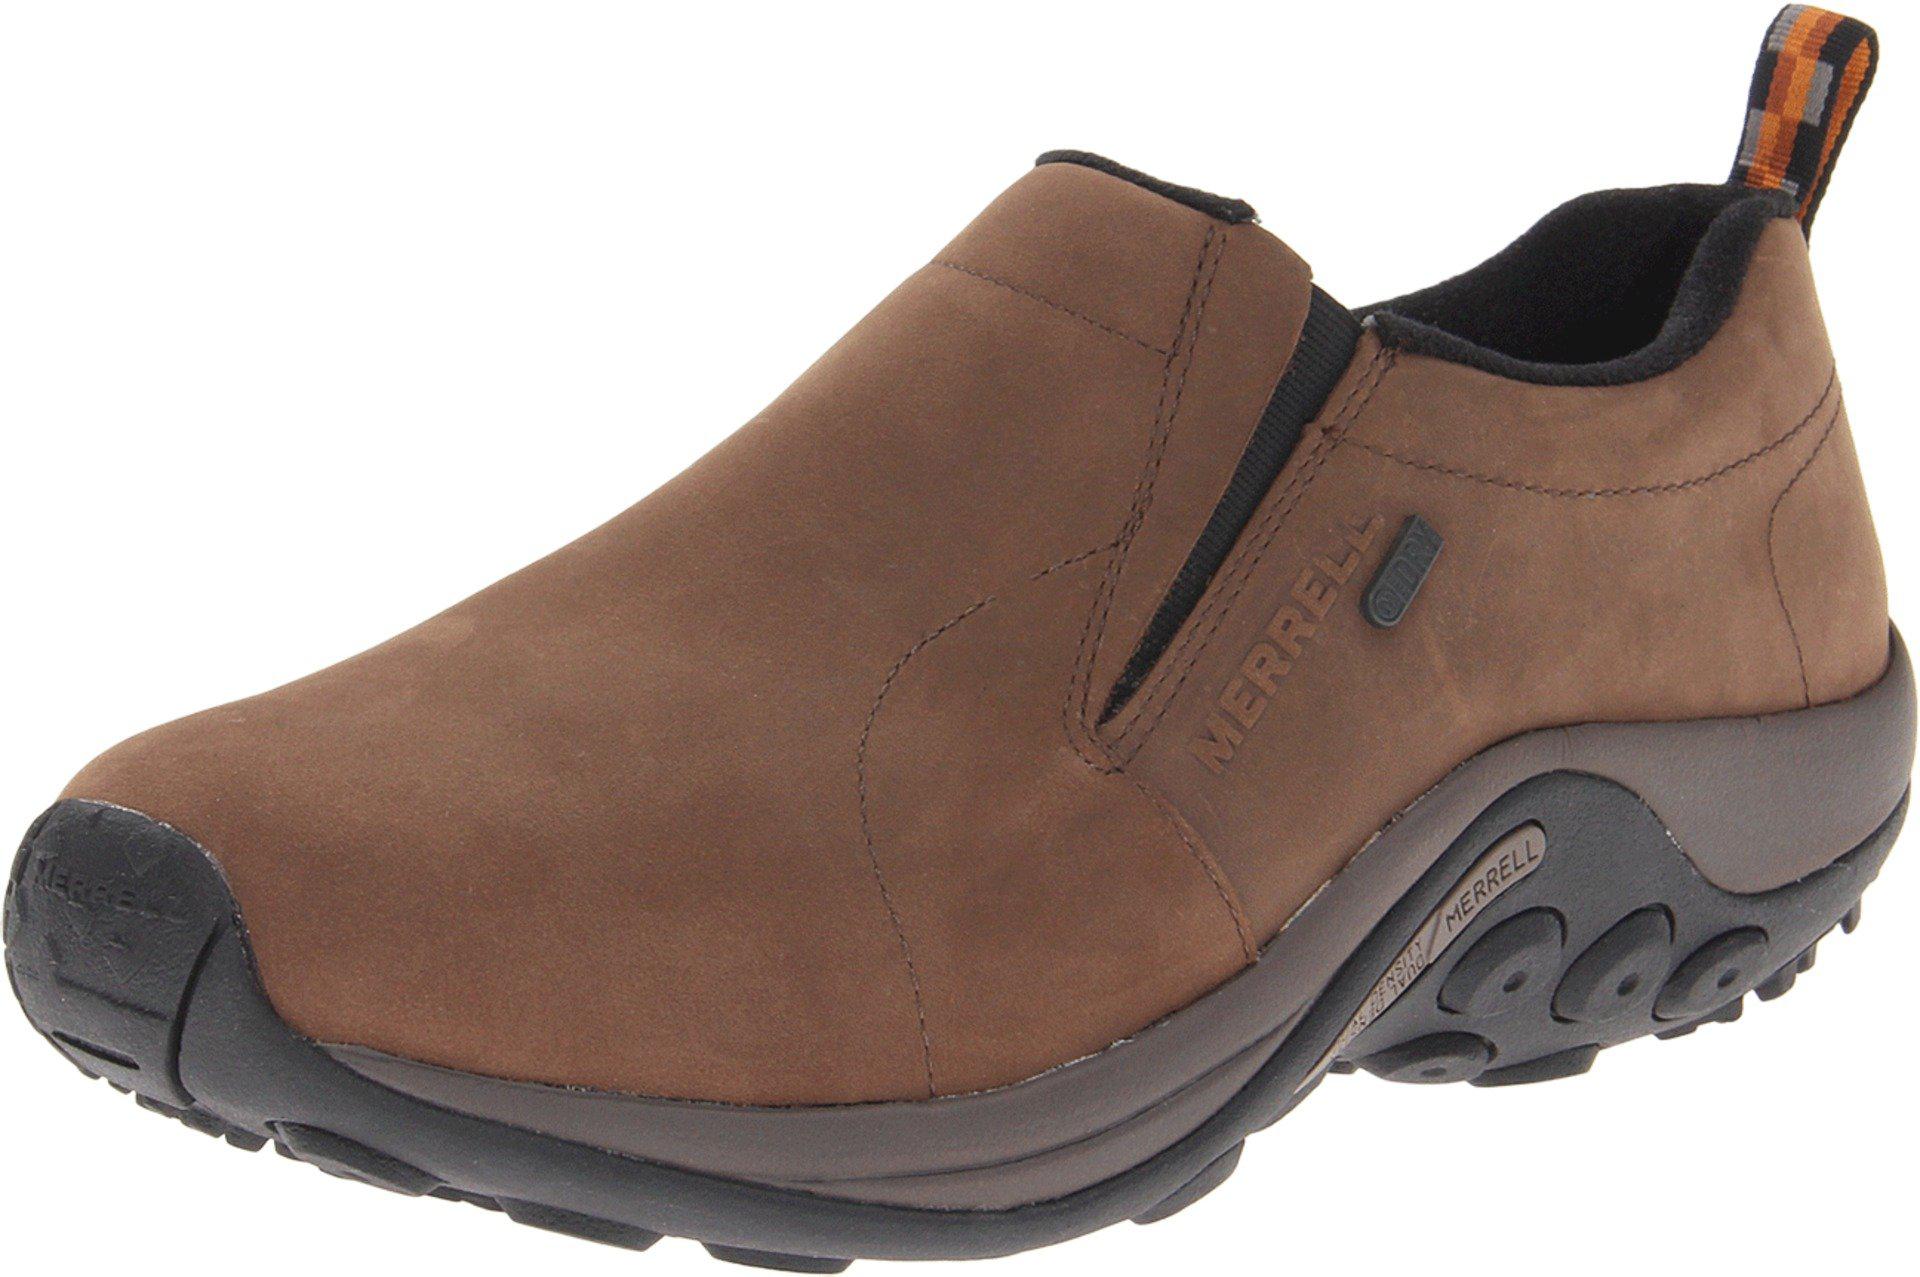 Merrell Leather Jungle Moc Nubuck Waterproof in Brown for Men - Save 14 ...